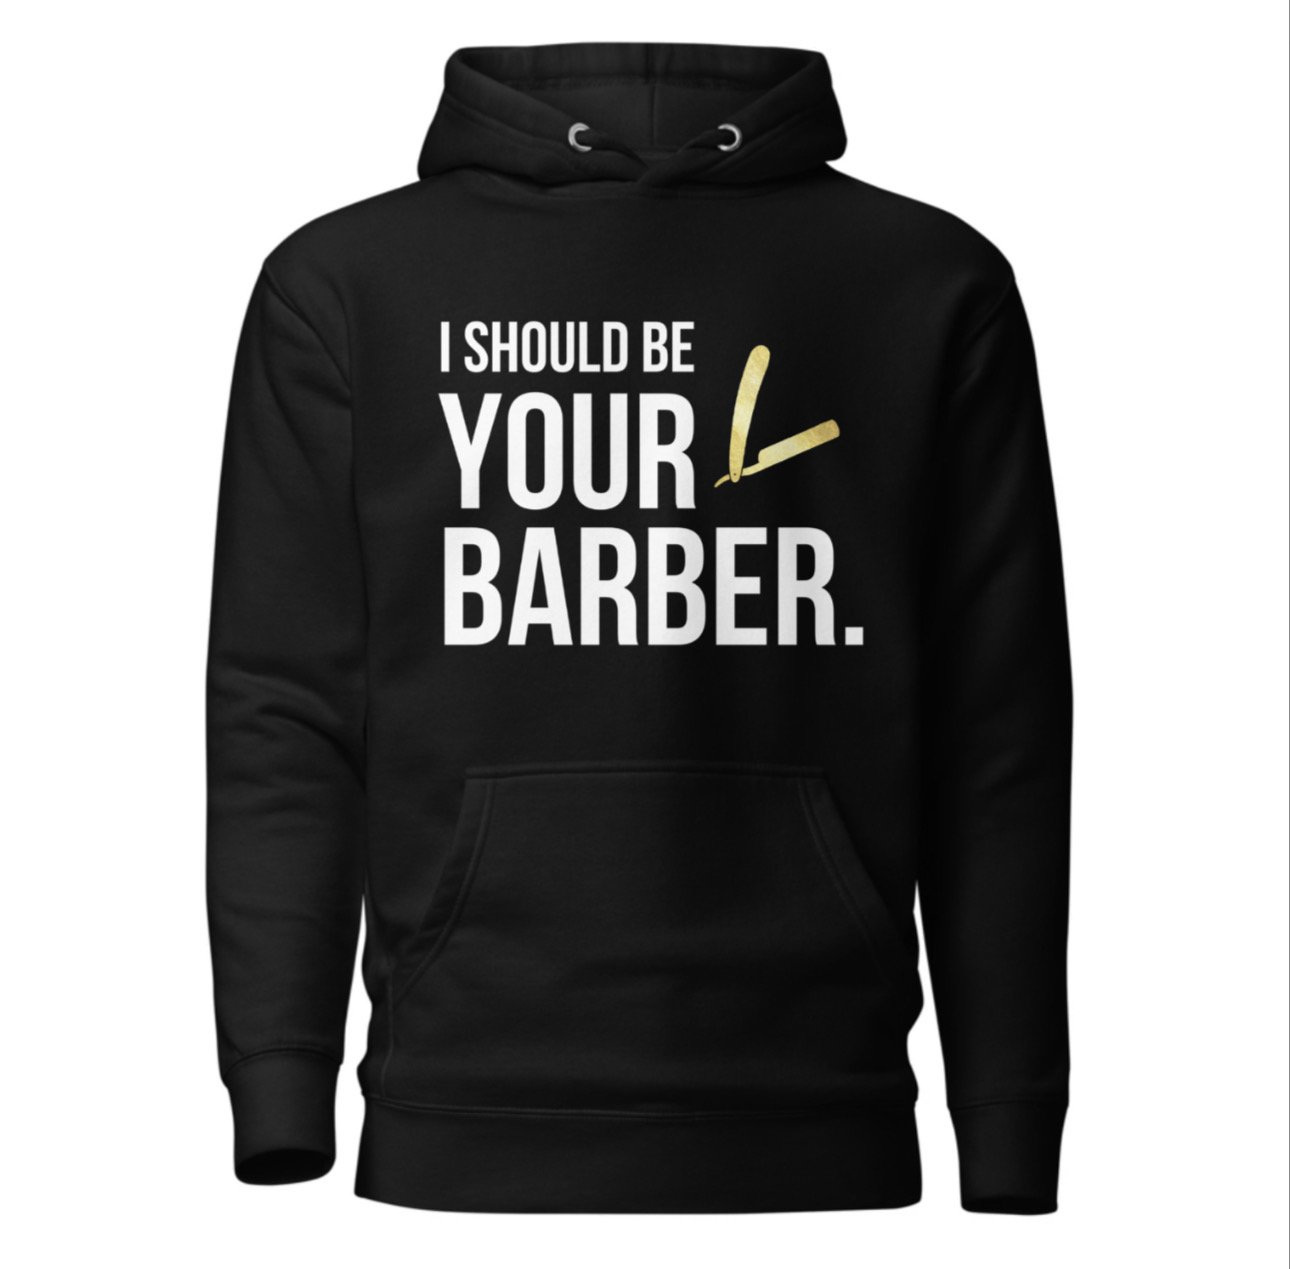 Image of *NEW HOODIE* “I Should Be Your Barber!”